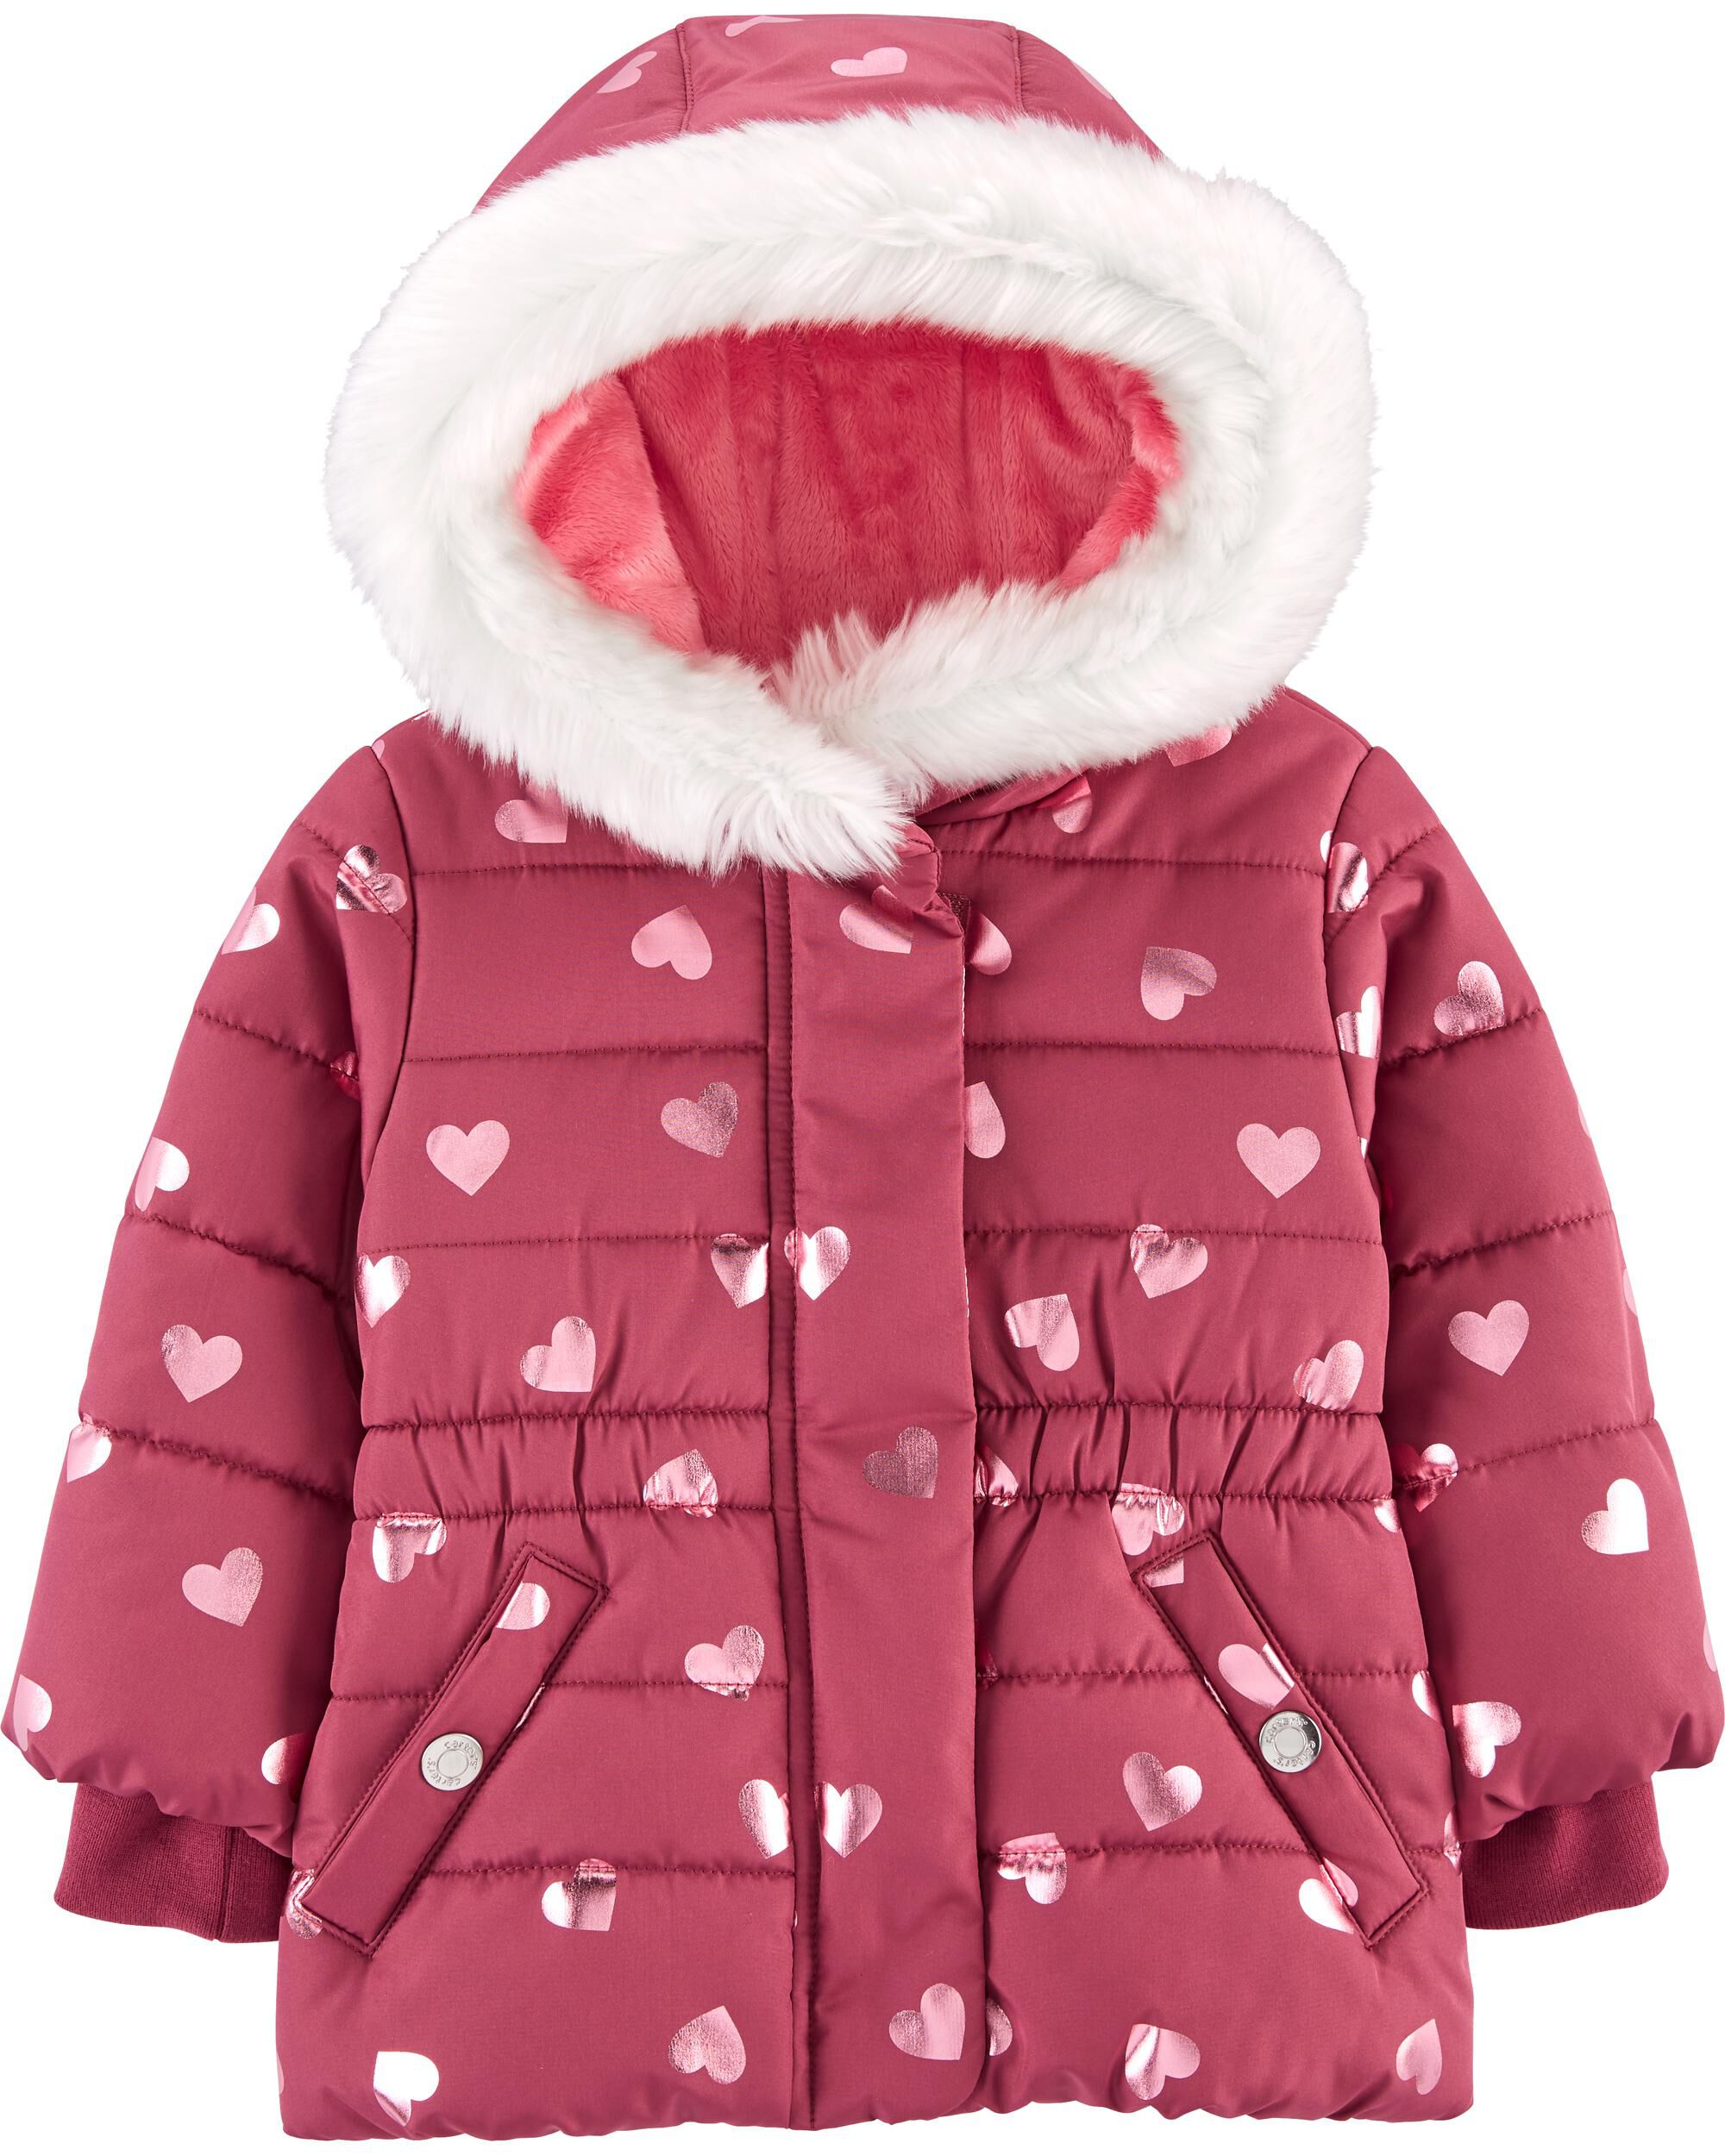 carters baby jackets